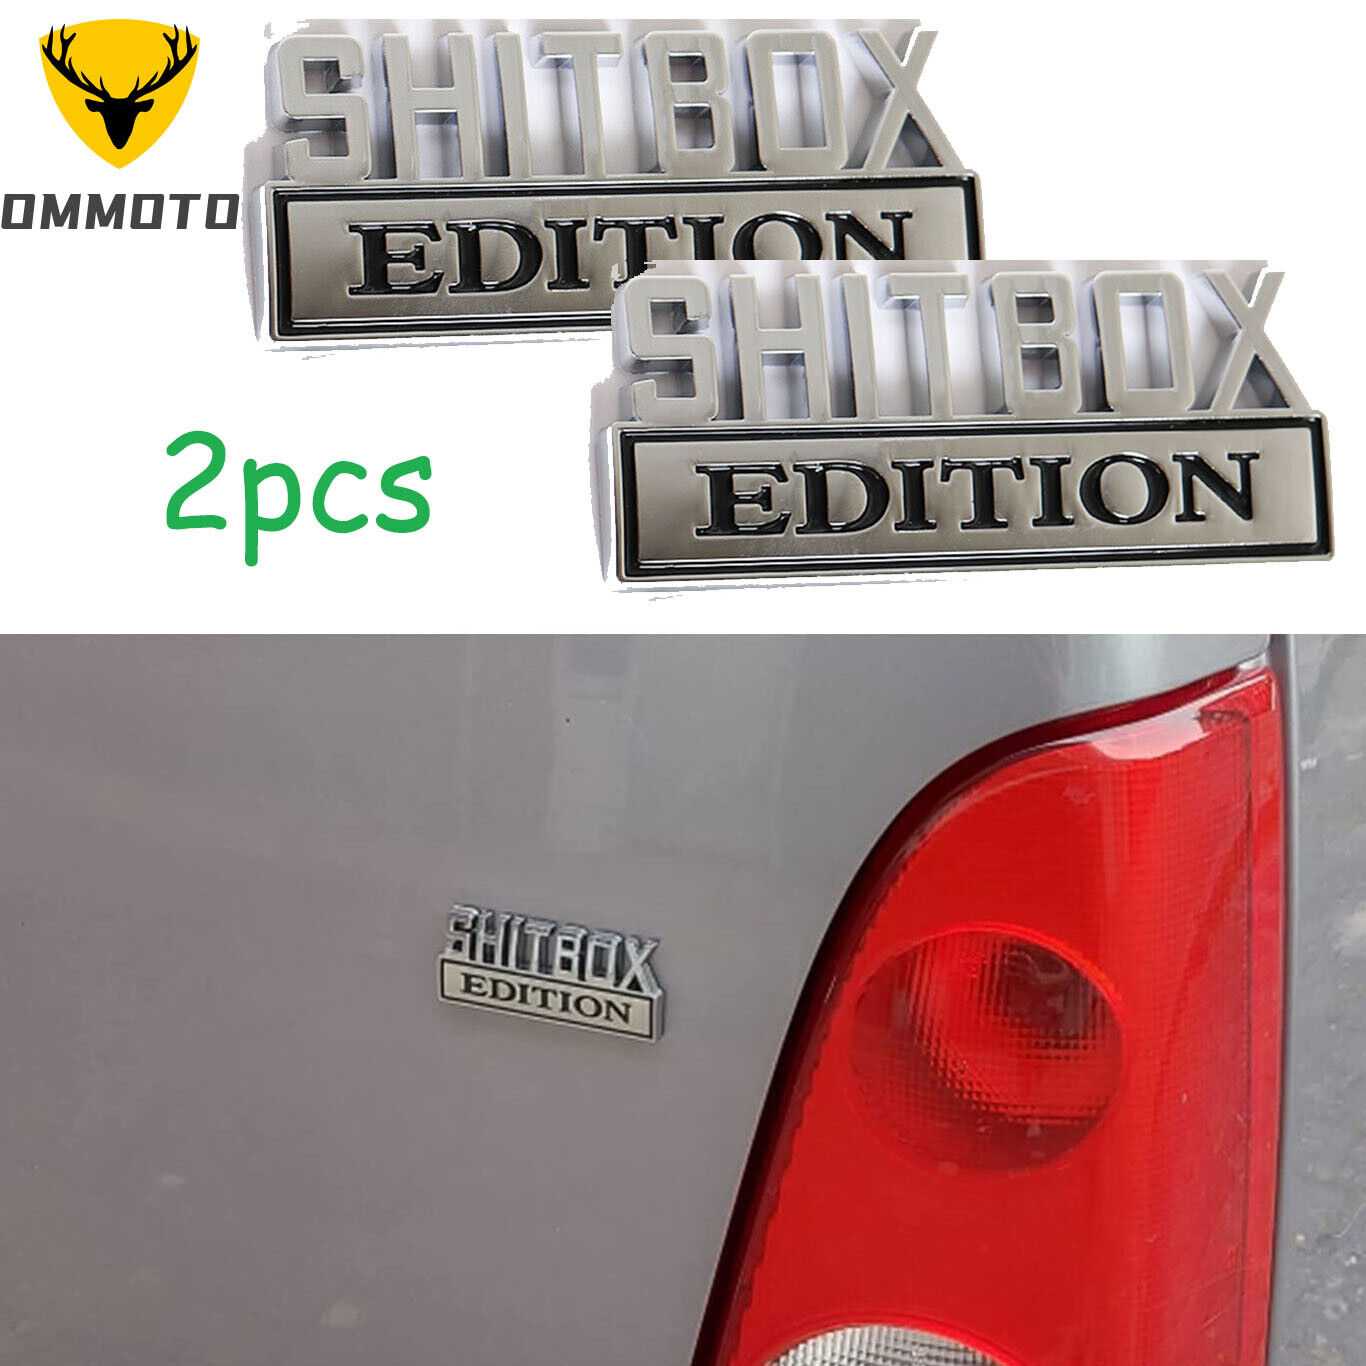 2pcs 3D SHITBOX EDITION Chrome Metal Emblem Decal Badge Stickers for GM Truck US